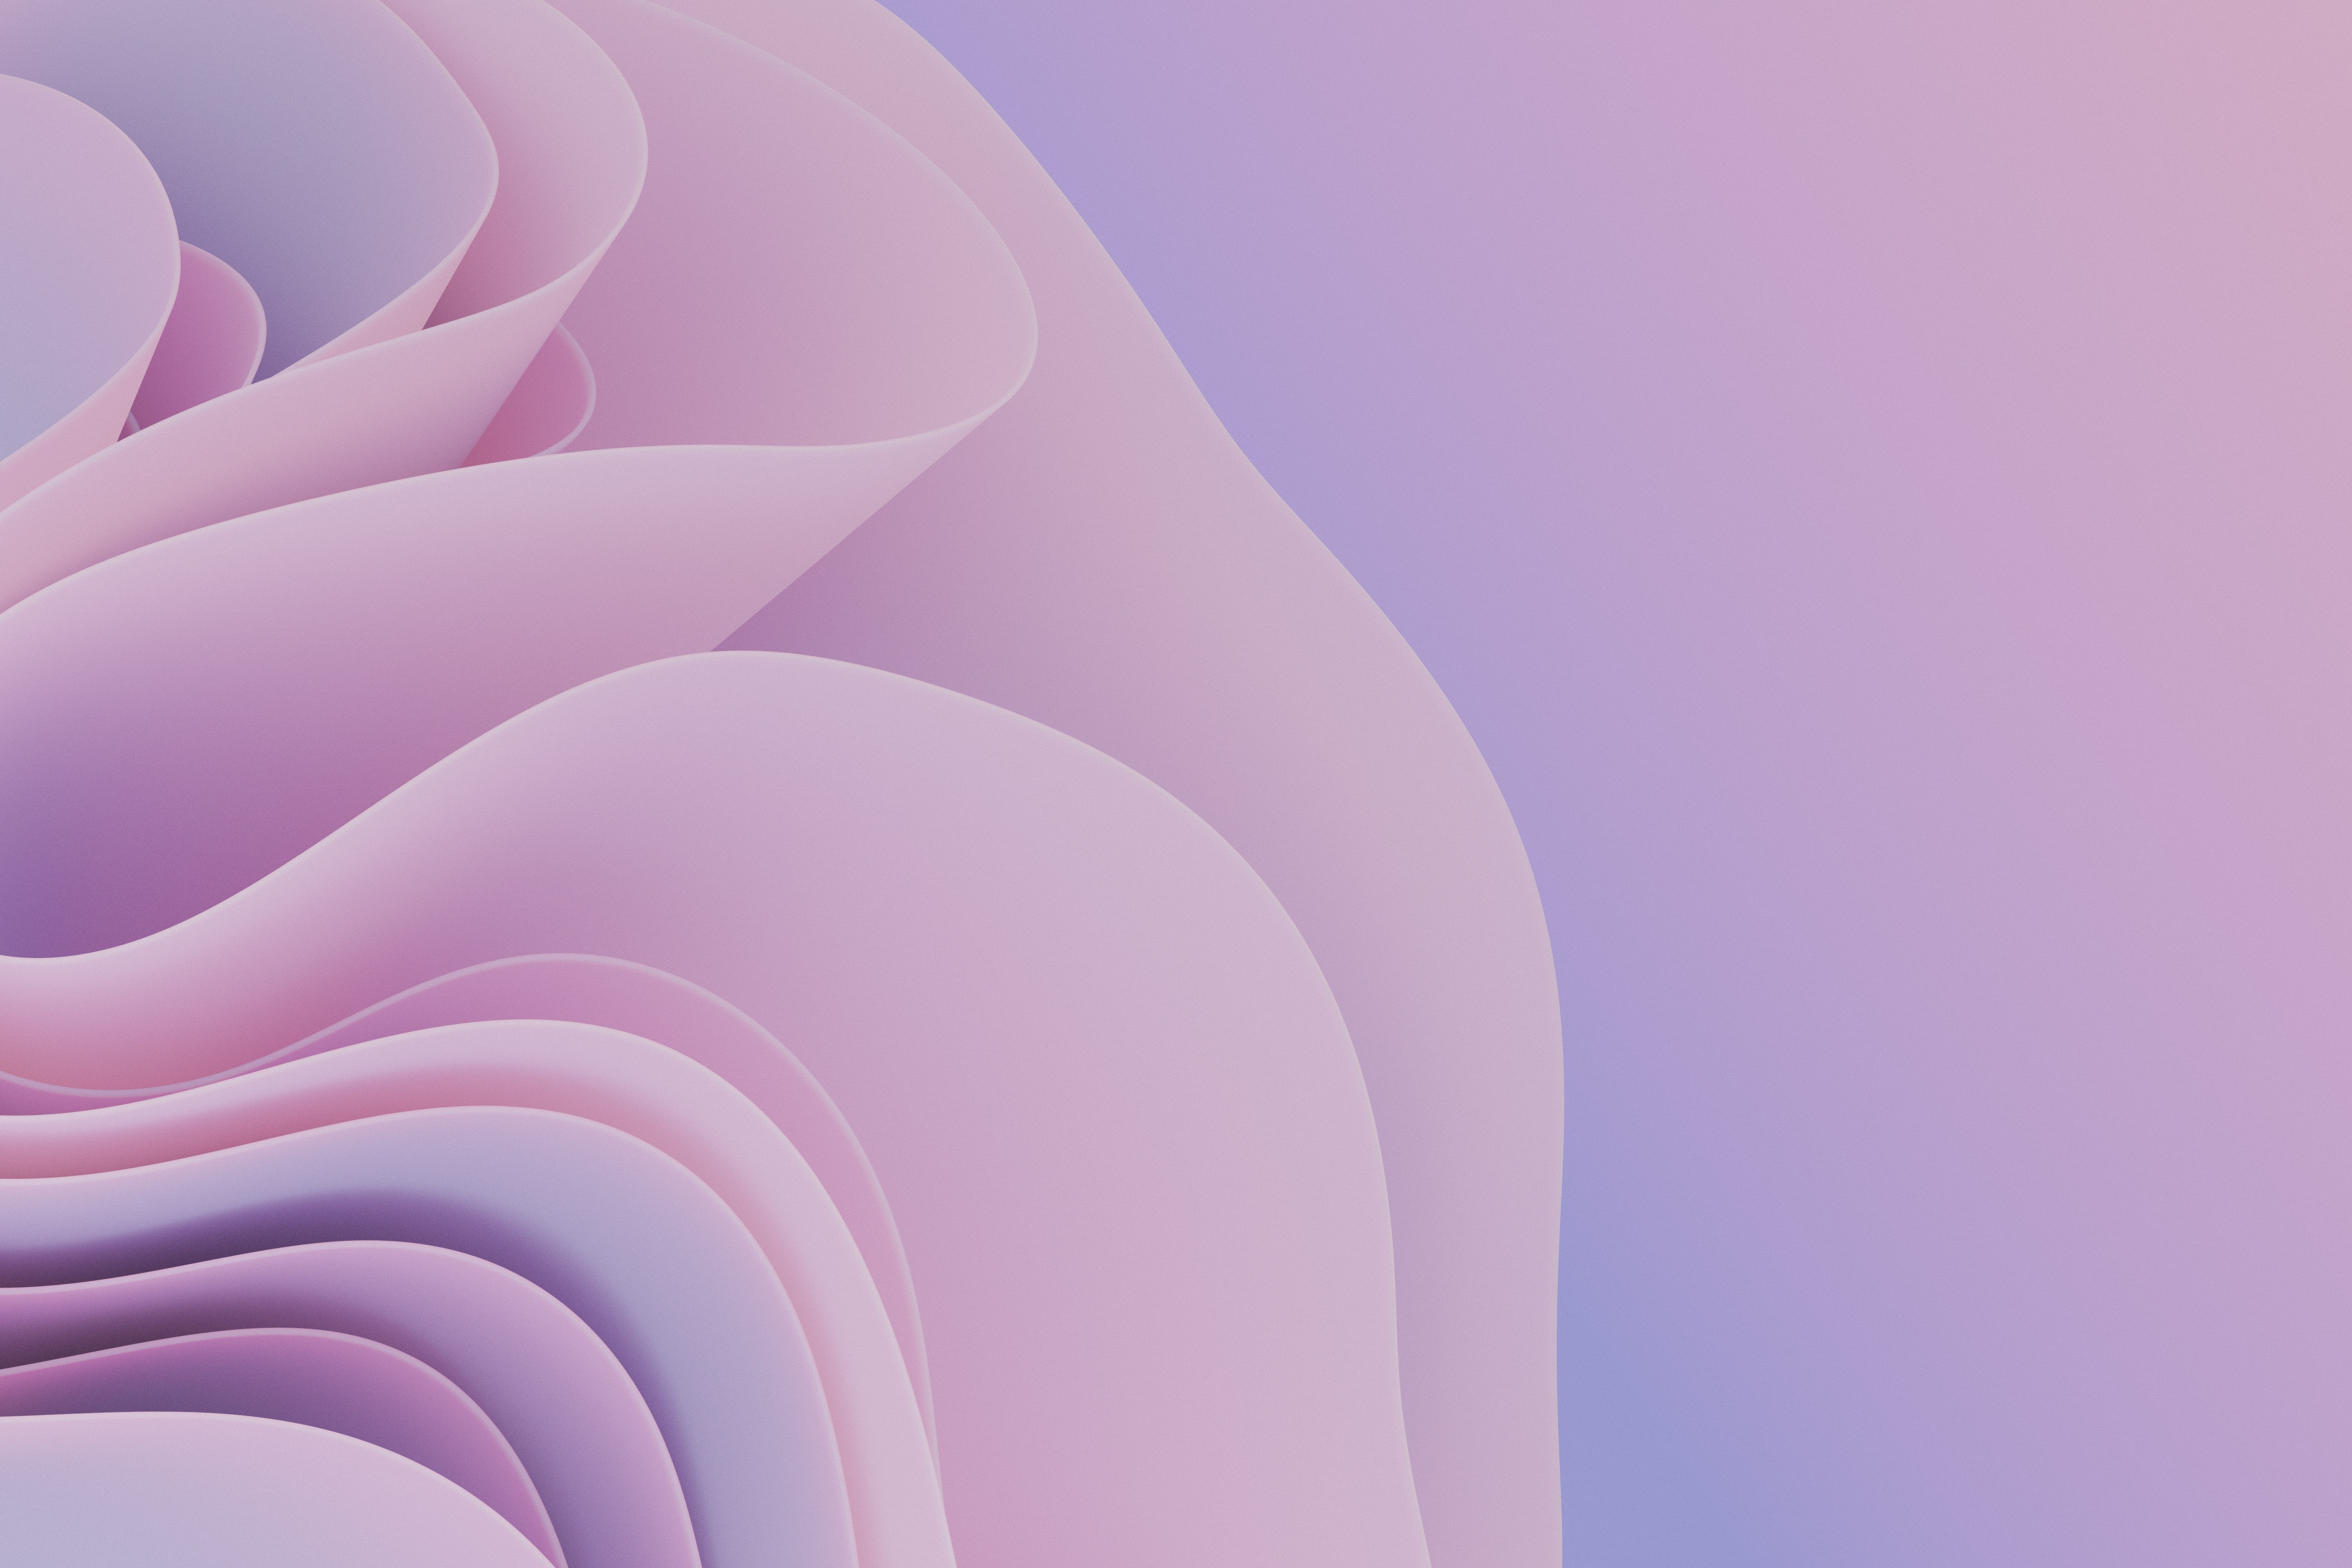 HD wallpaper, Aesthetic, Pink Abstract, Pattern, Girly, 3D Render, 5K, Waves